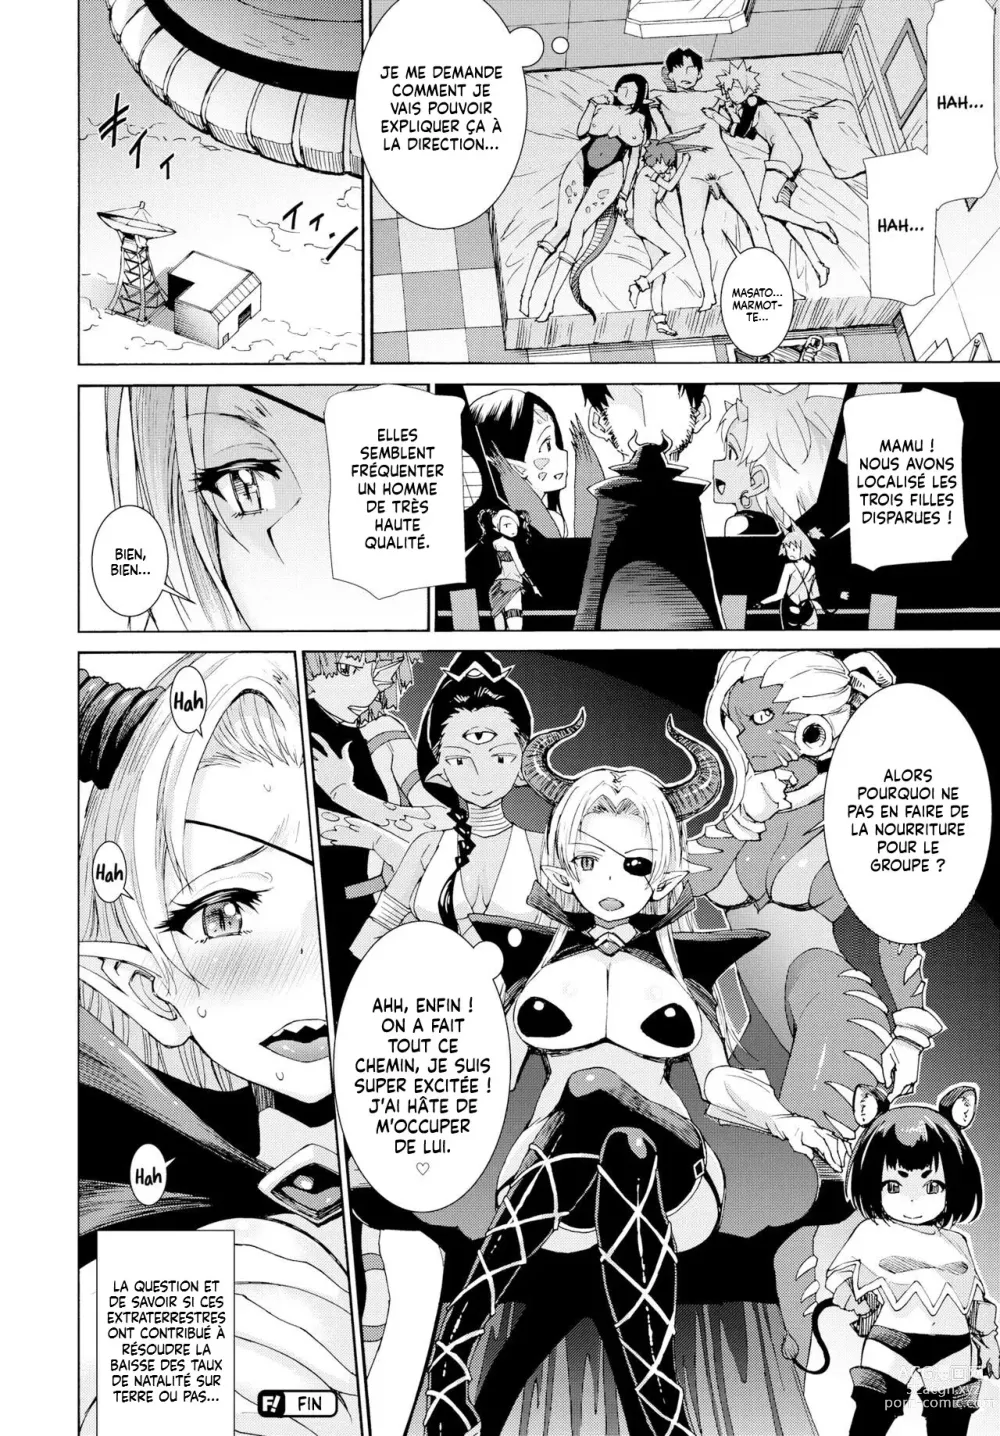 Page 21 of doujinshi Invasion of the Alien Girls